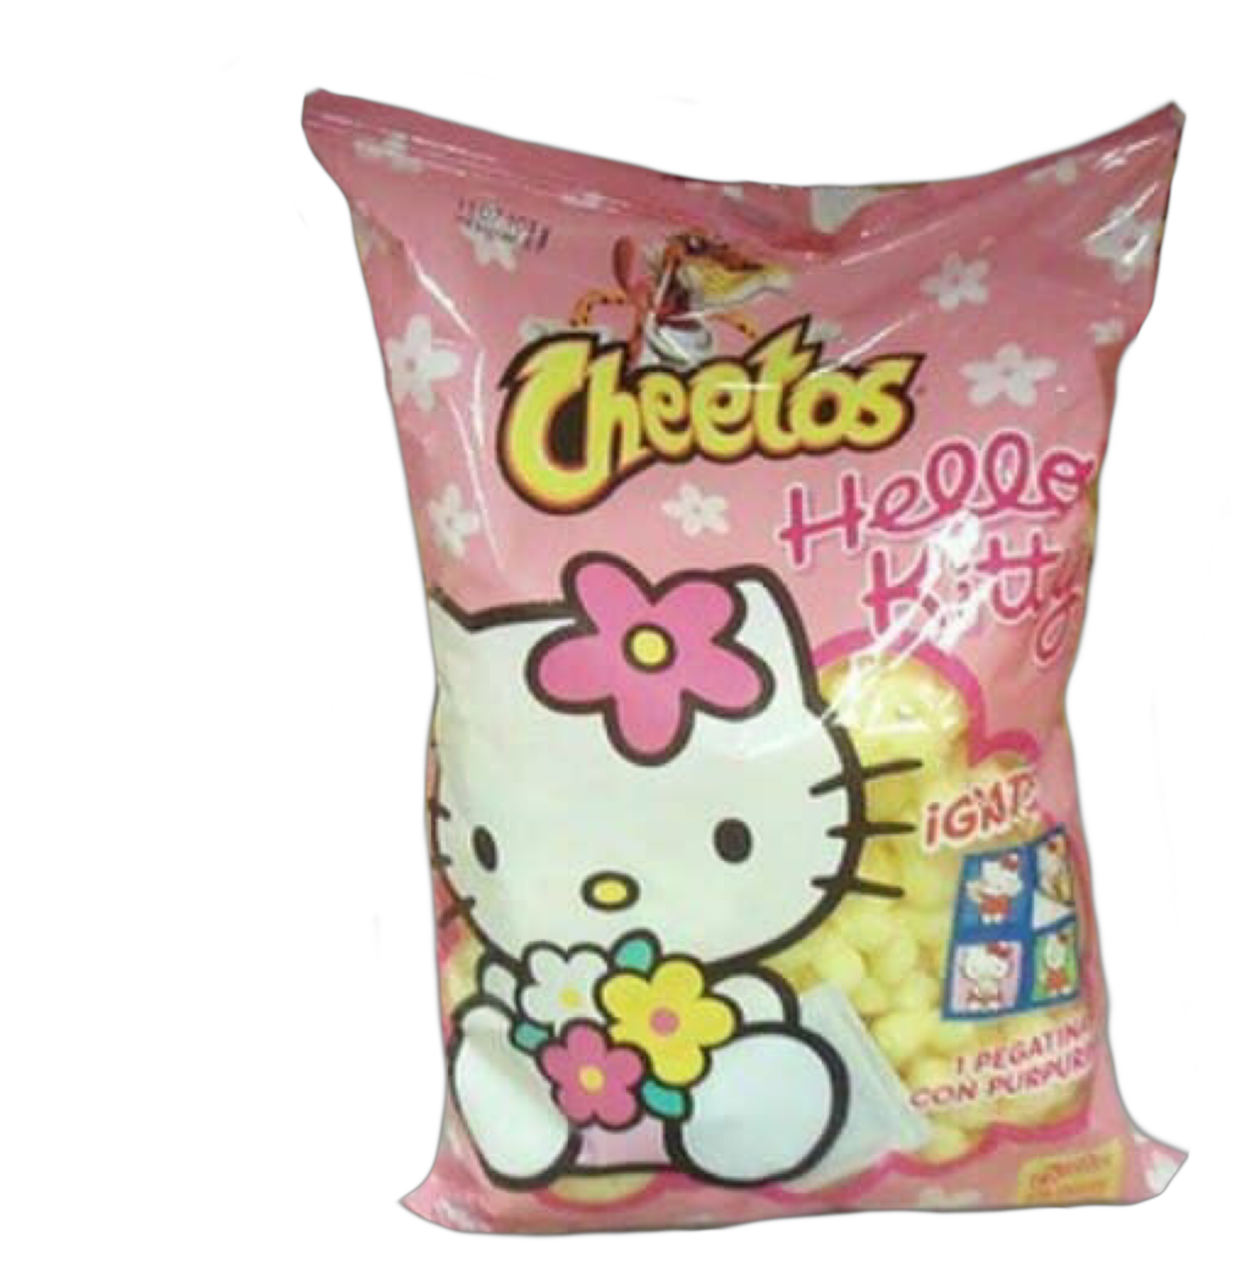 A Bag Of Food With A Cartoon Character